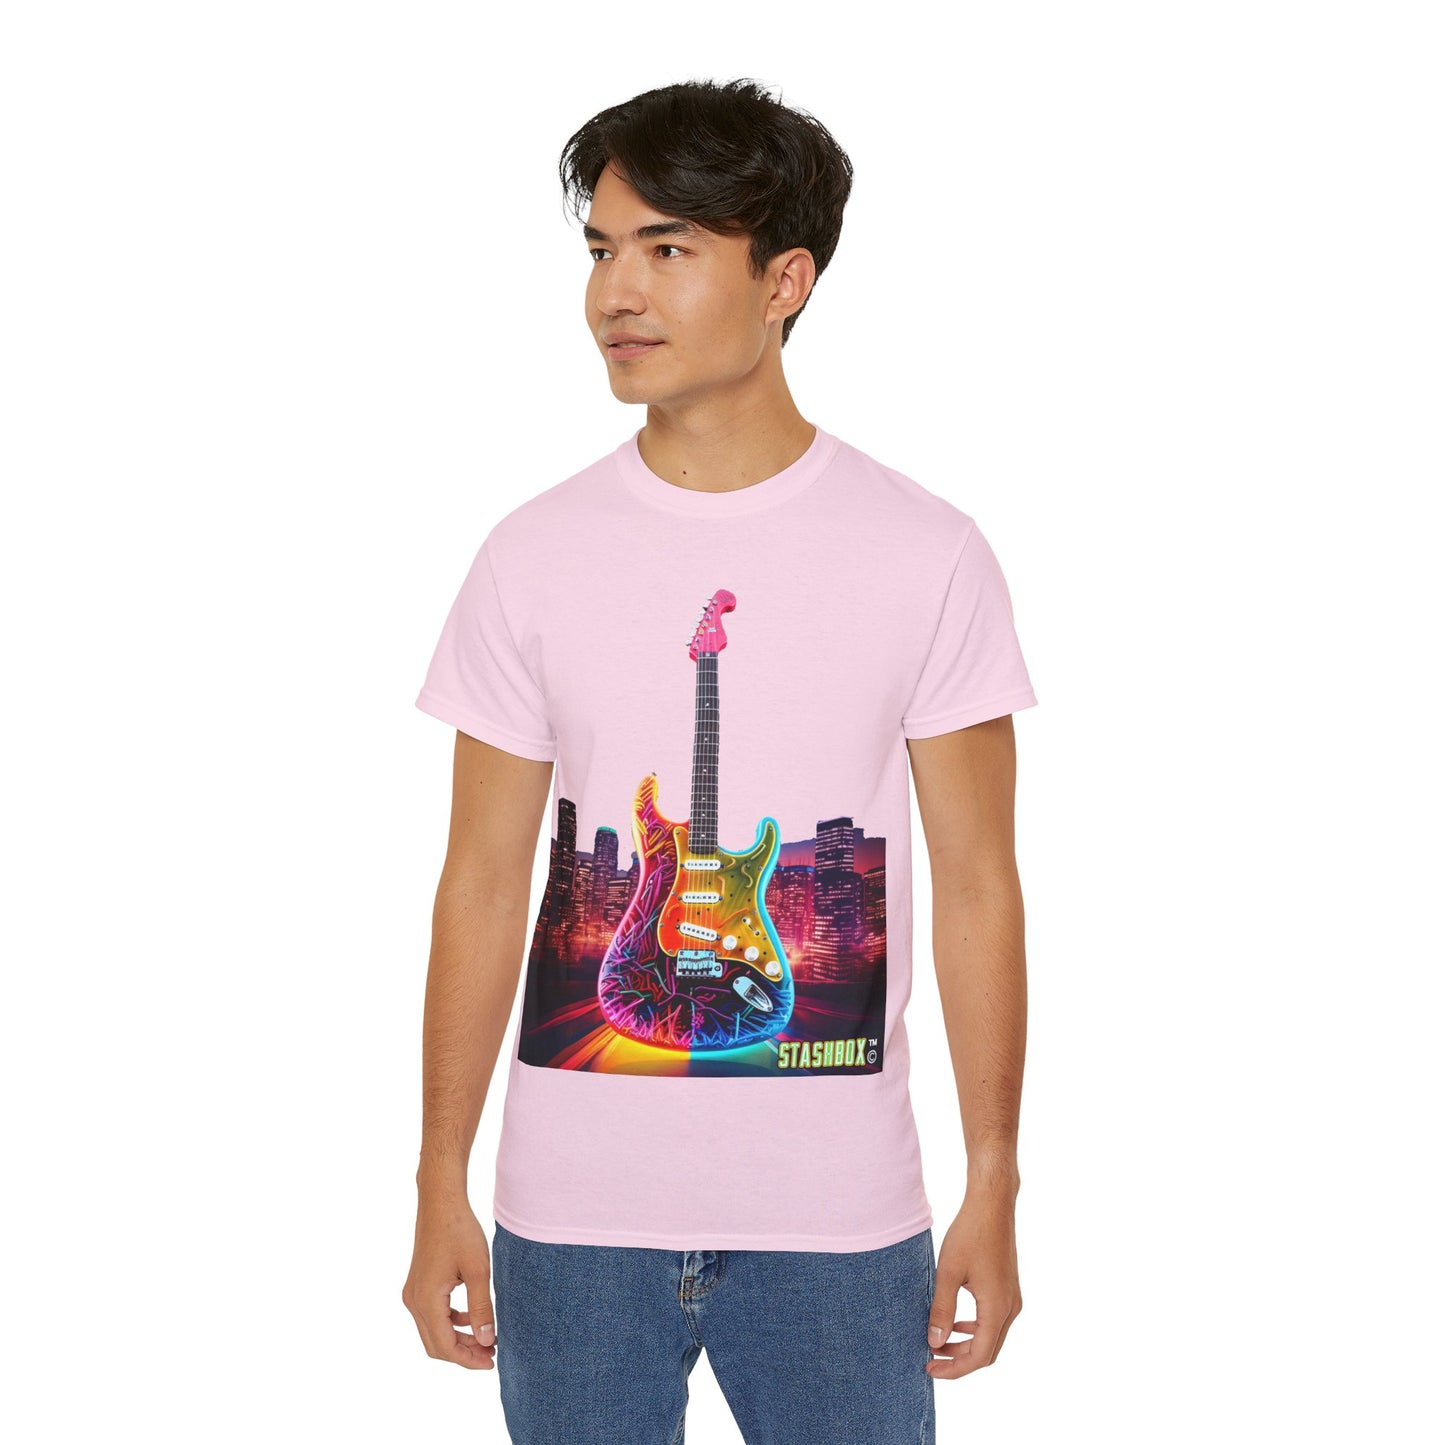 Unisex Ultra Cotton Tshirt - Colorful Electric Guitar 001